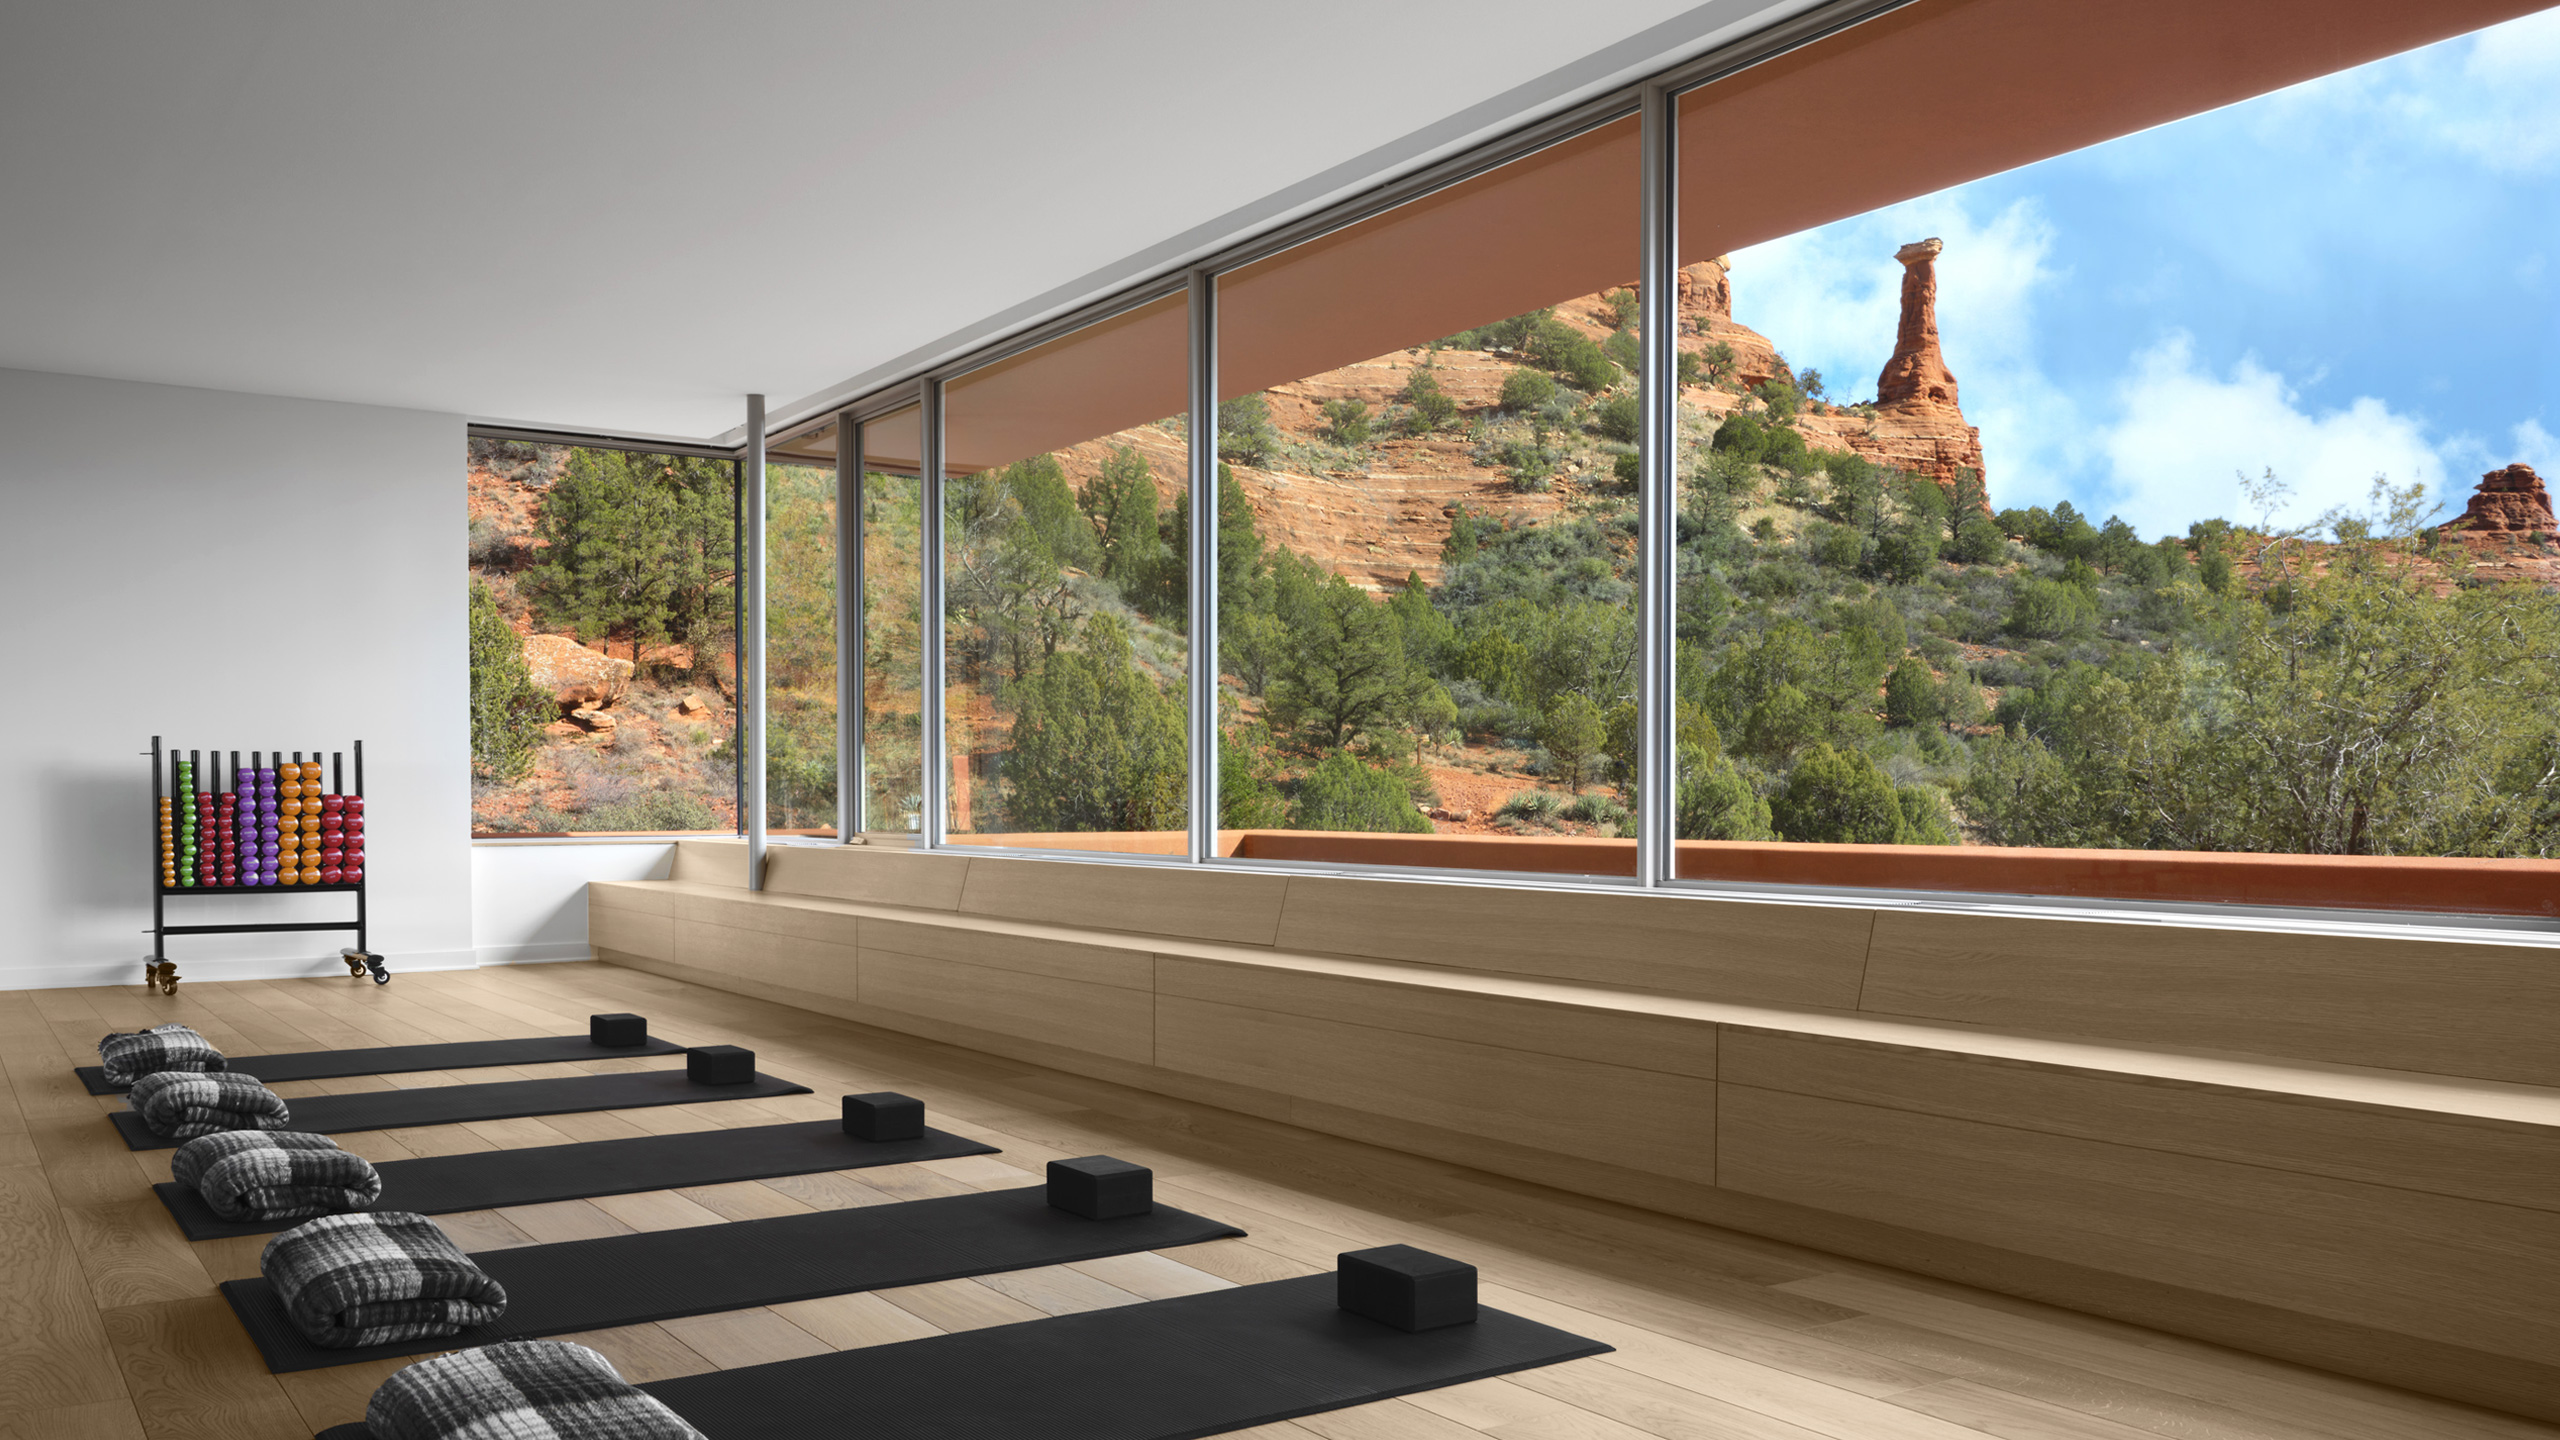 yoga mats lined up on floor with views of Kachina Women in Mii amo Fitness Studio